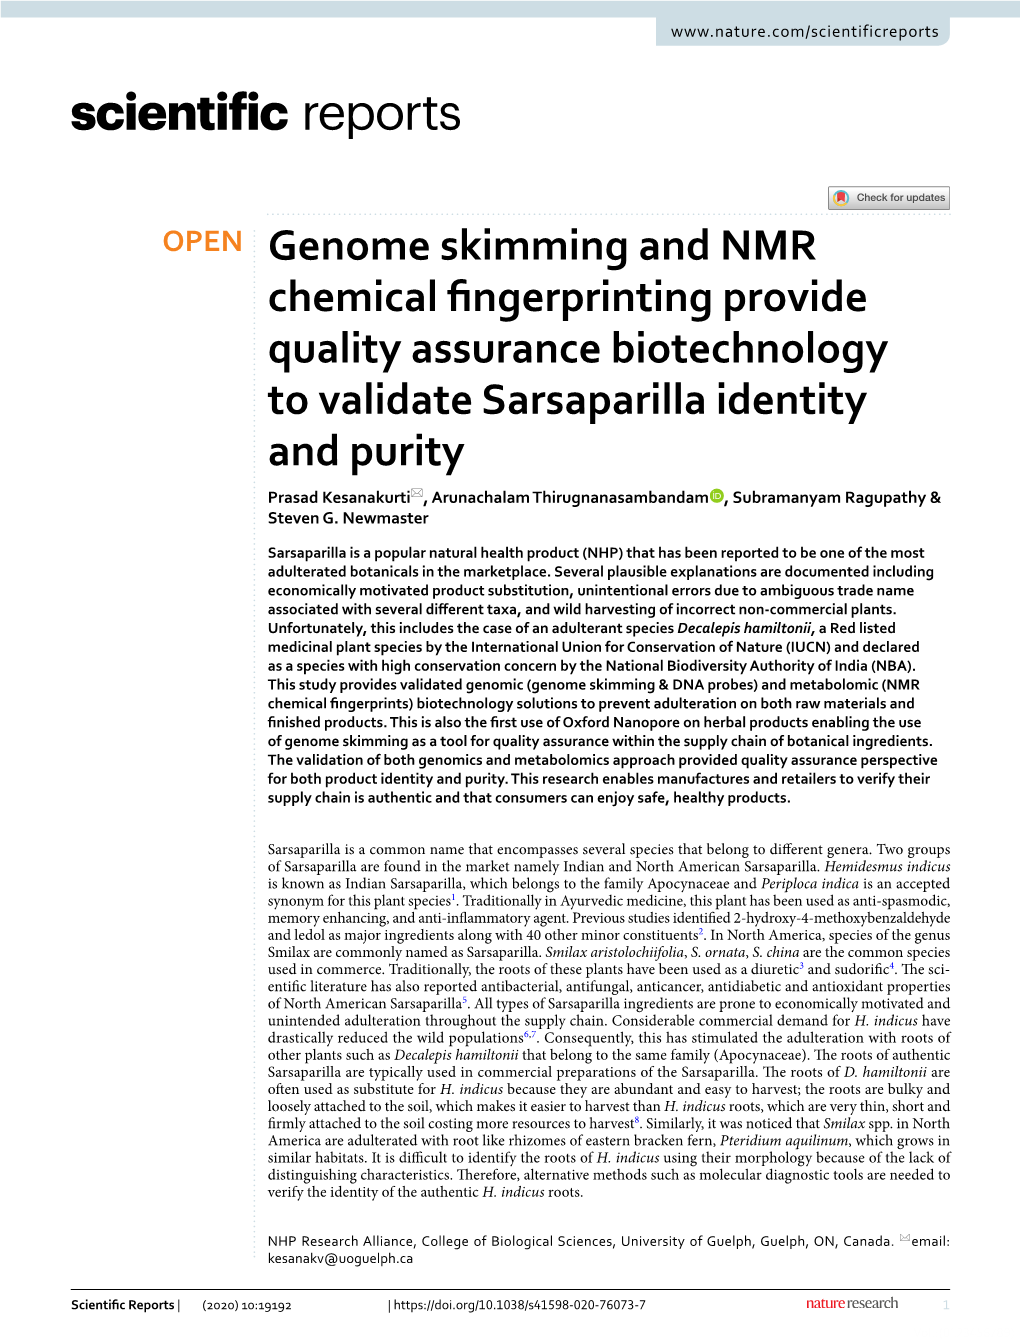 Genome Skimming and NMR Chemical Fingerprinting Provide Quality